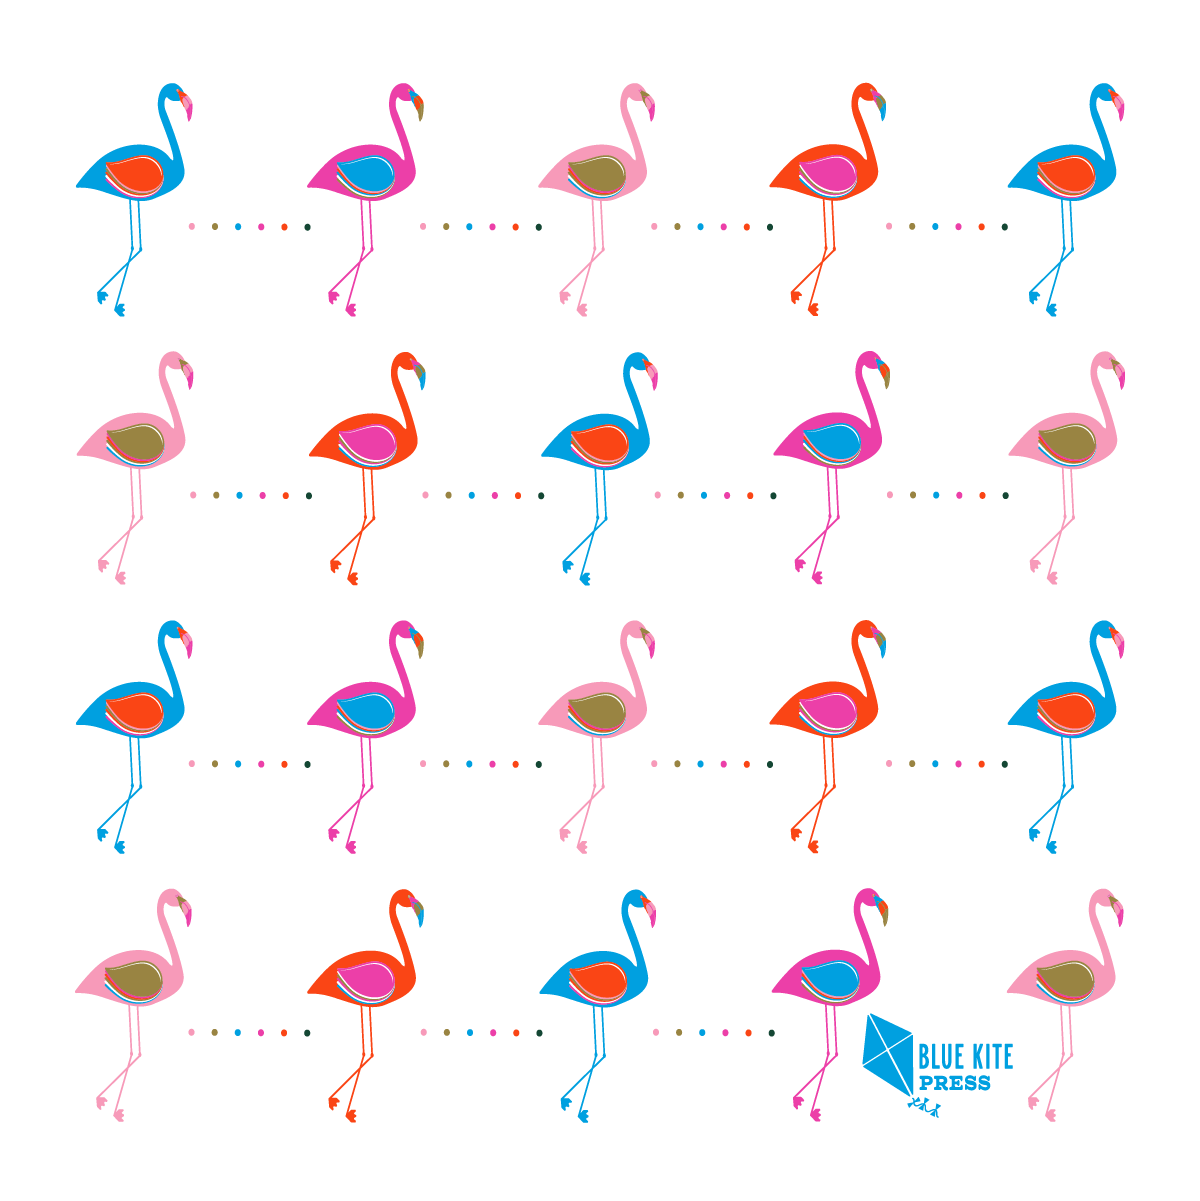 Flamingo collection from Blue Kite Press. Modern, retro-inspired illustration of a conga line of pink, blue and orange flamingos.